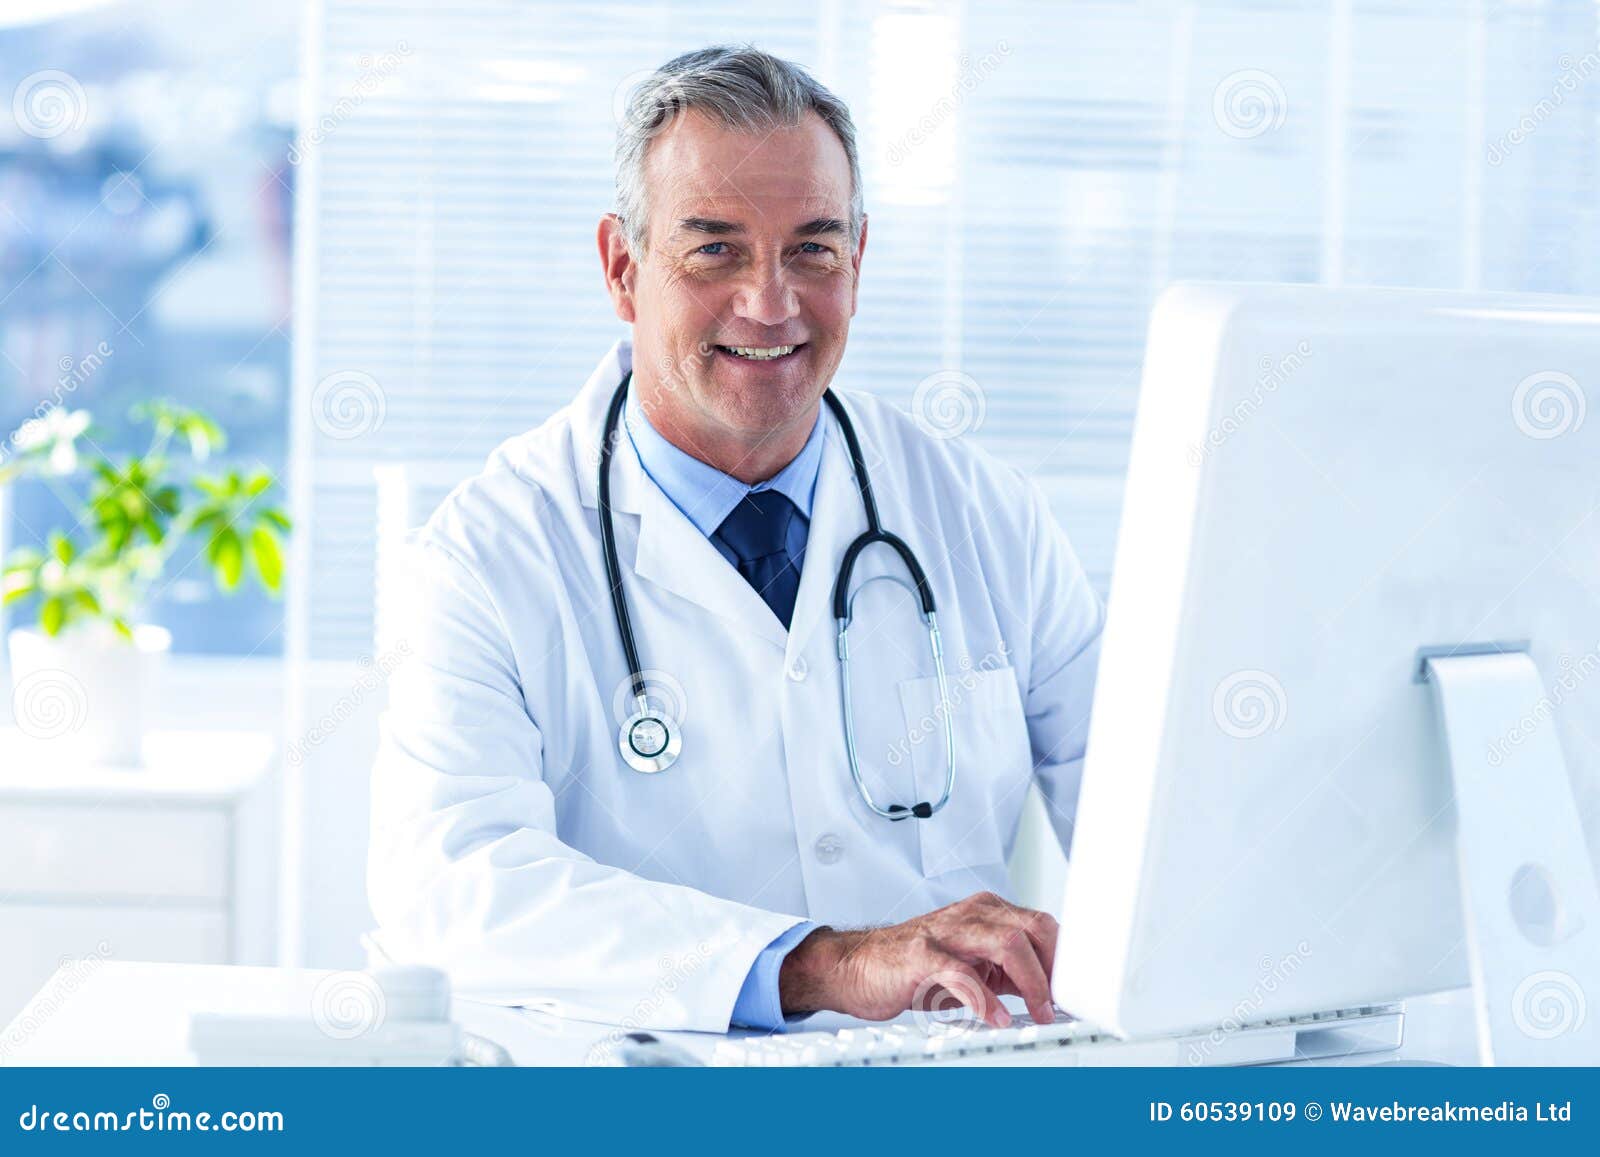 Smiling Male Doctor Using Computer in Clinic Stock Image - Image of ...